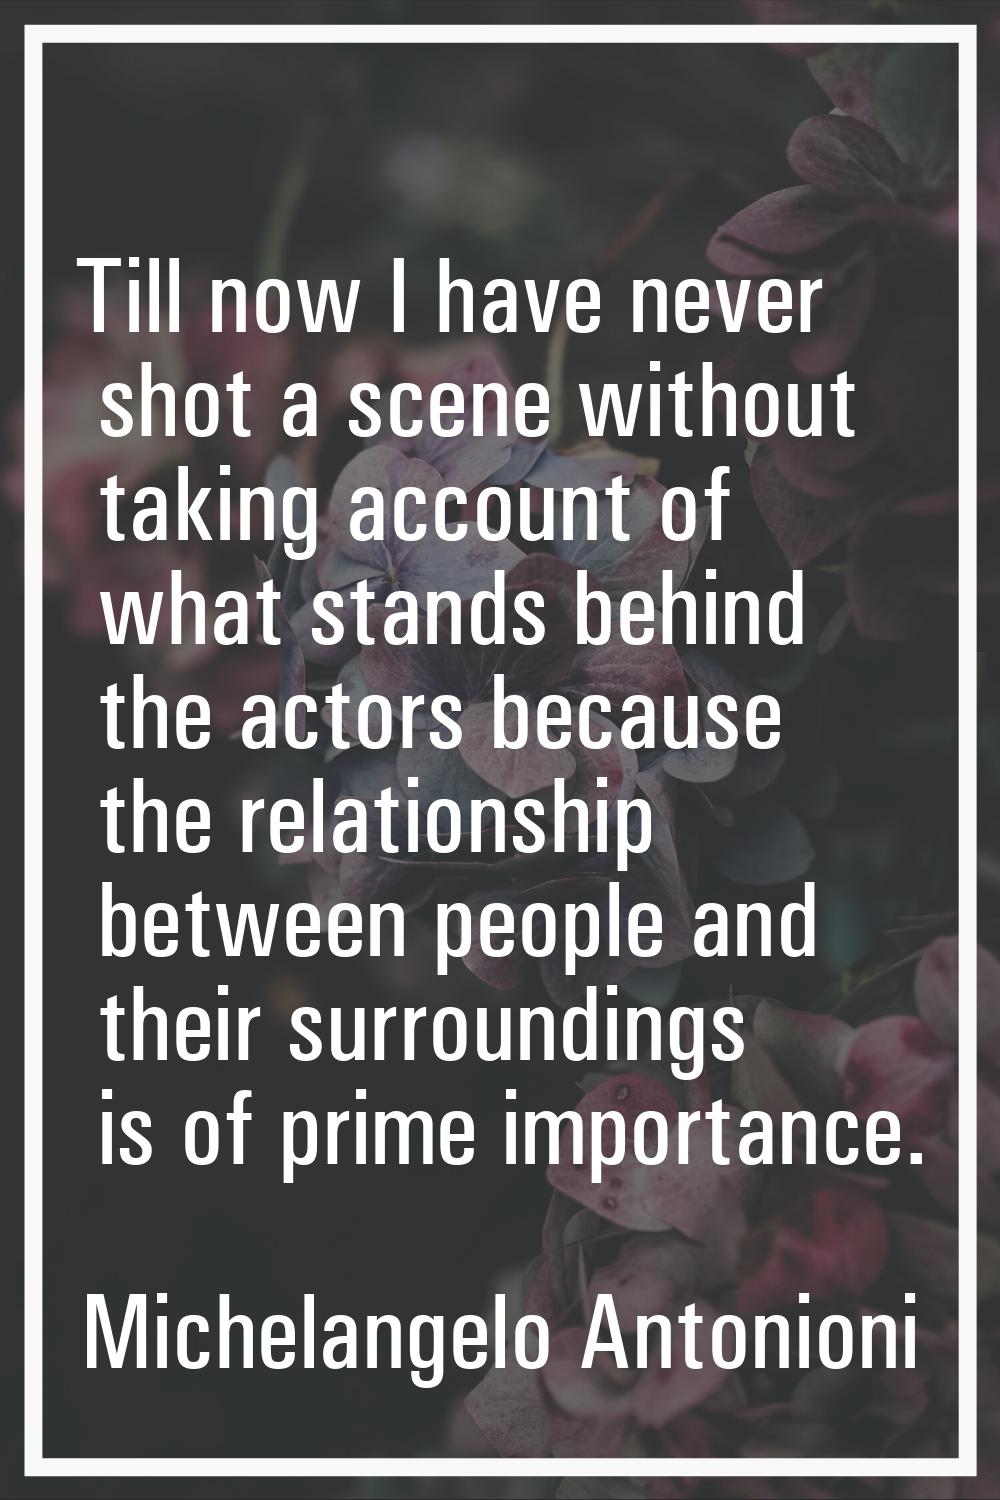 Till now I have never shot a scene without taking account of what stands behind the actors because 